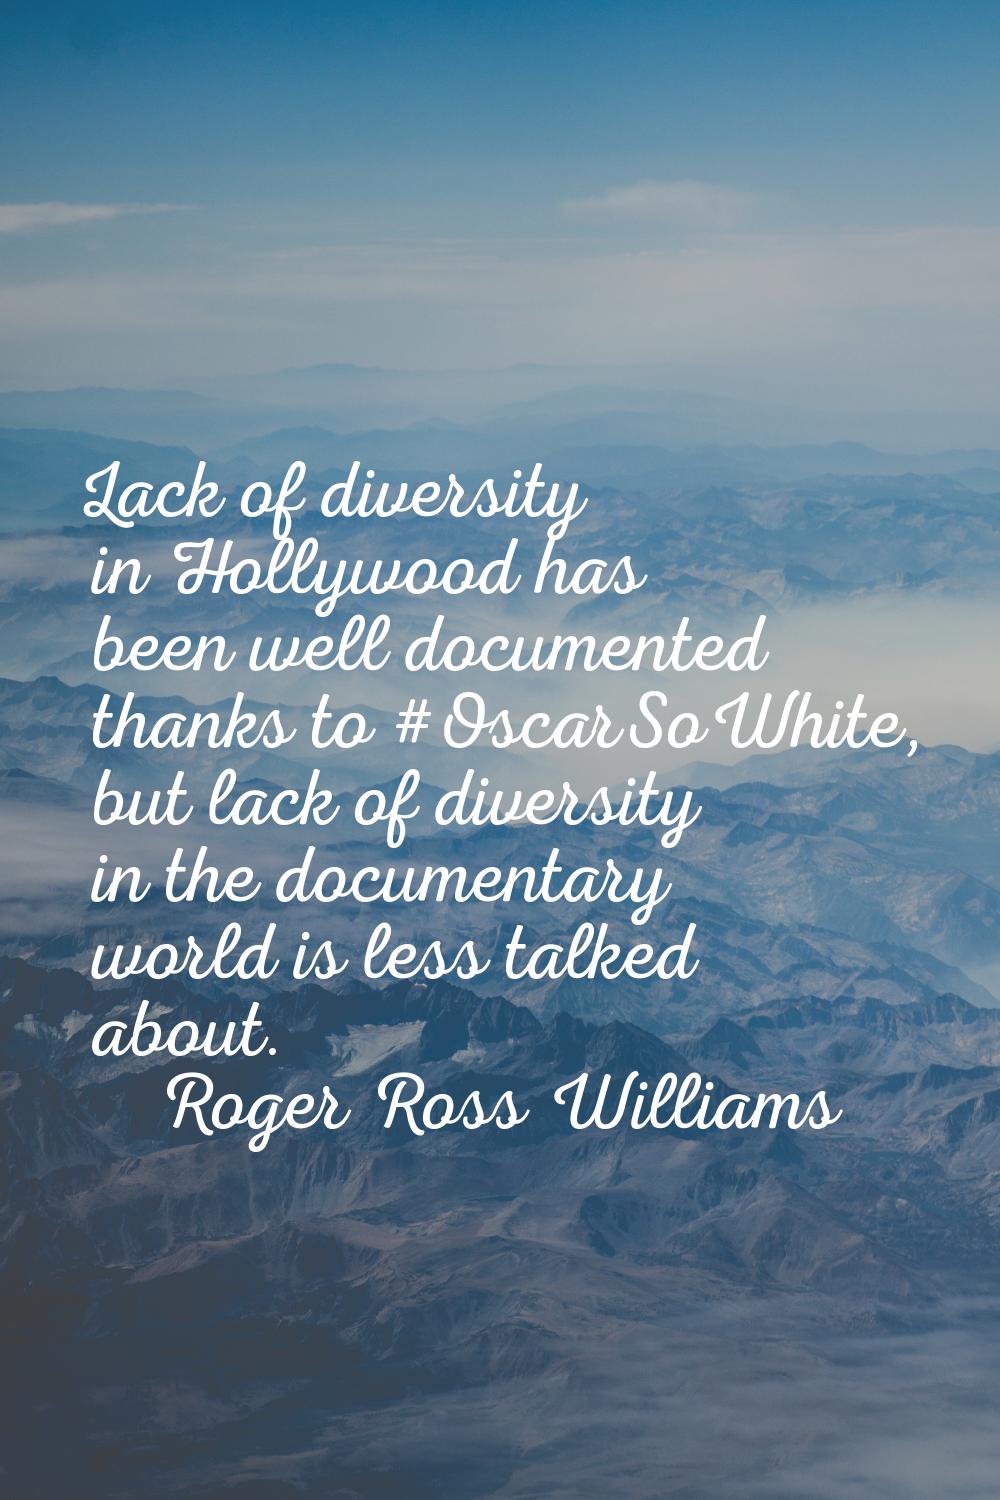 Lack of diversity in Hollywood has been well documented thanks to #OscarSoWhite, but lack of divers